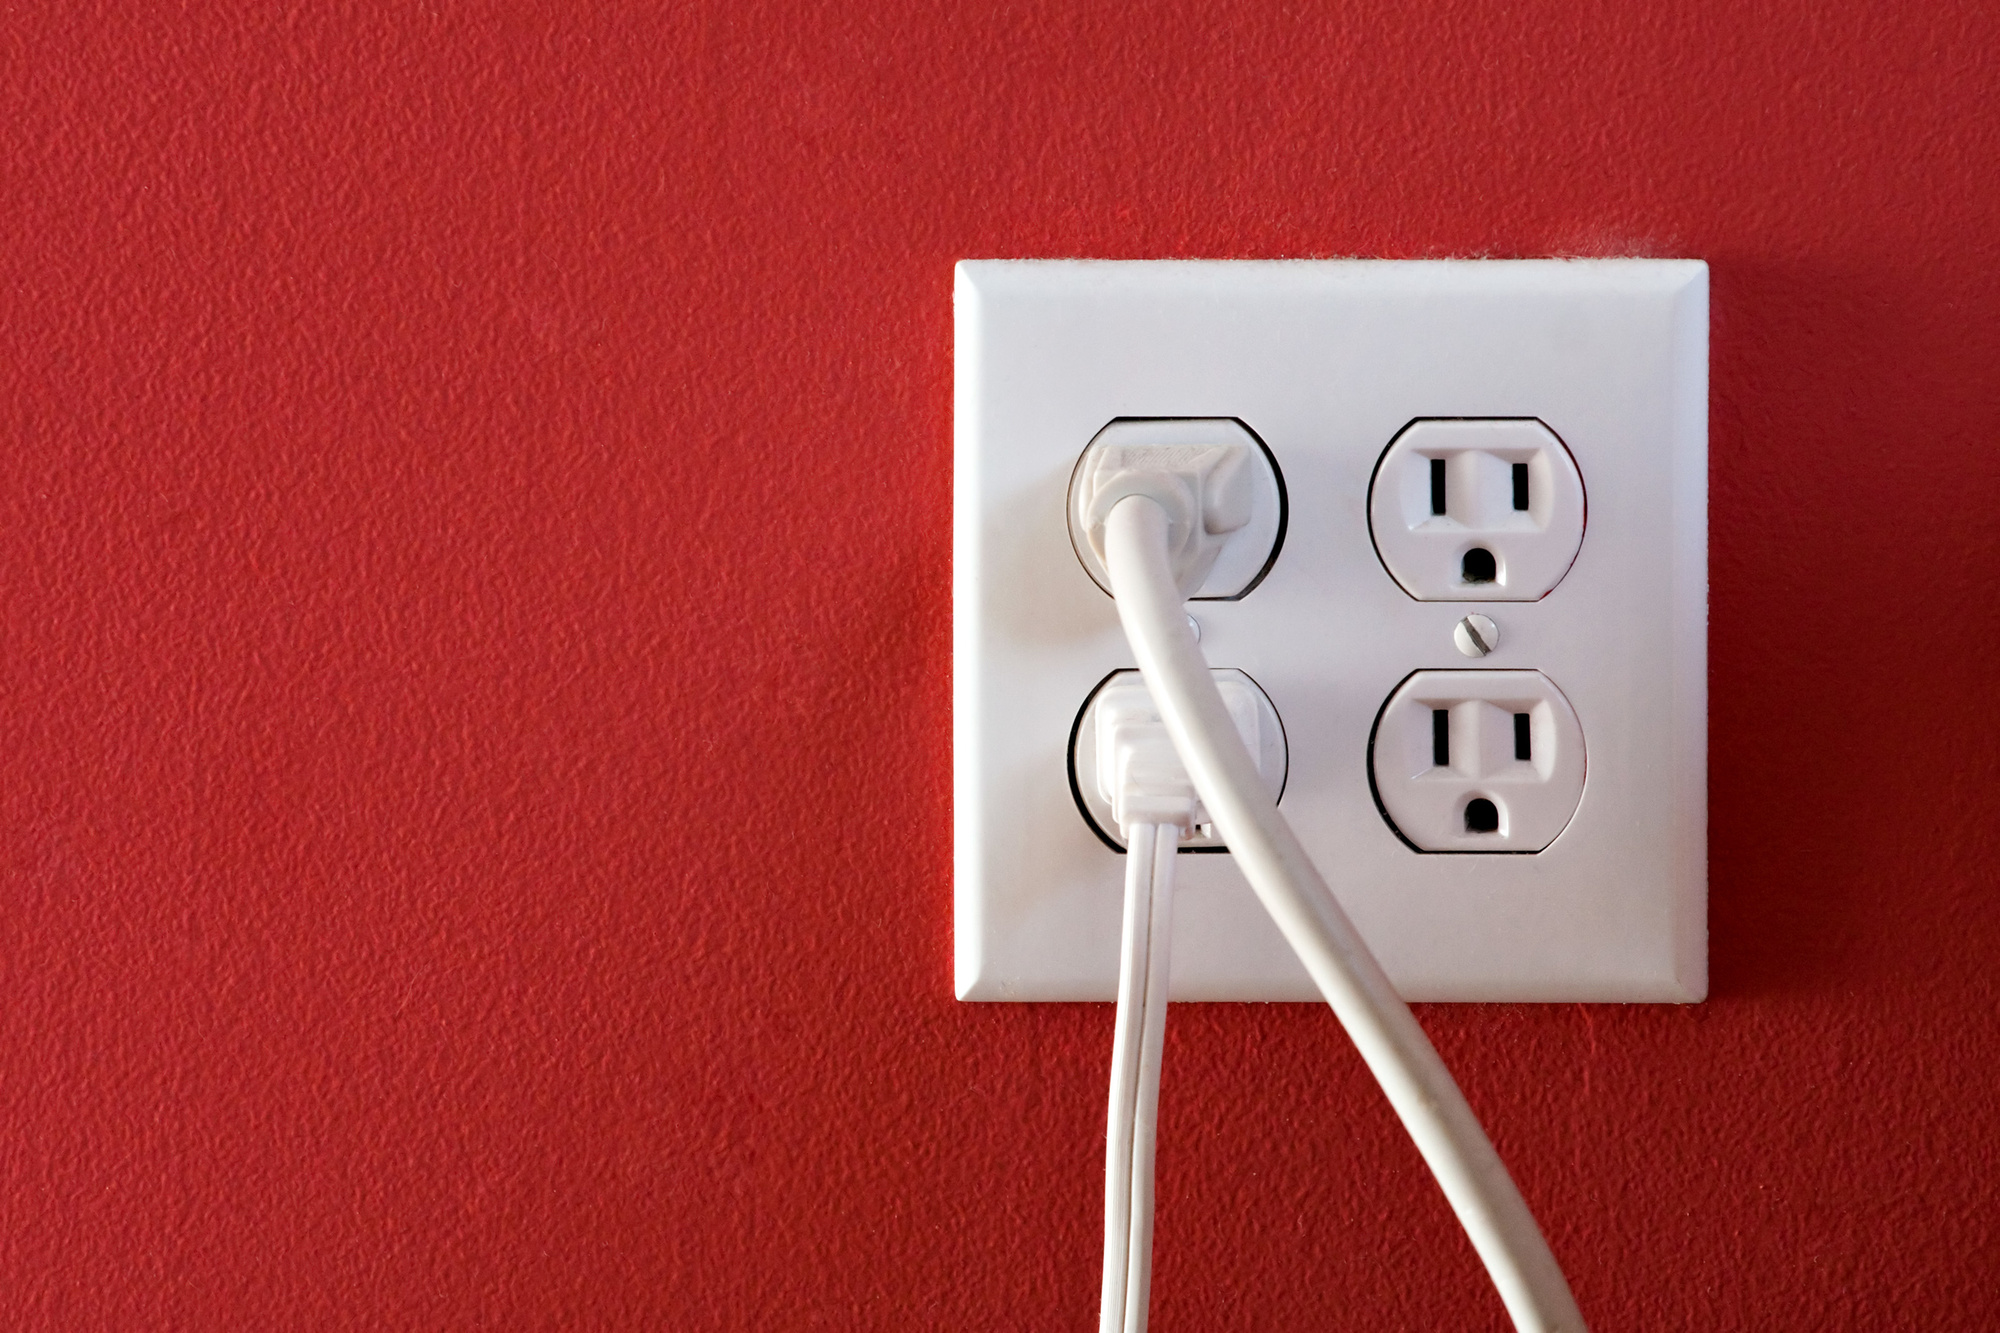 4 Best Questions to Ask a Home Electrical Service Before Hiring Them